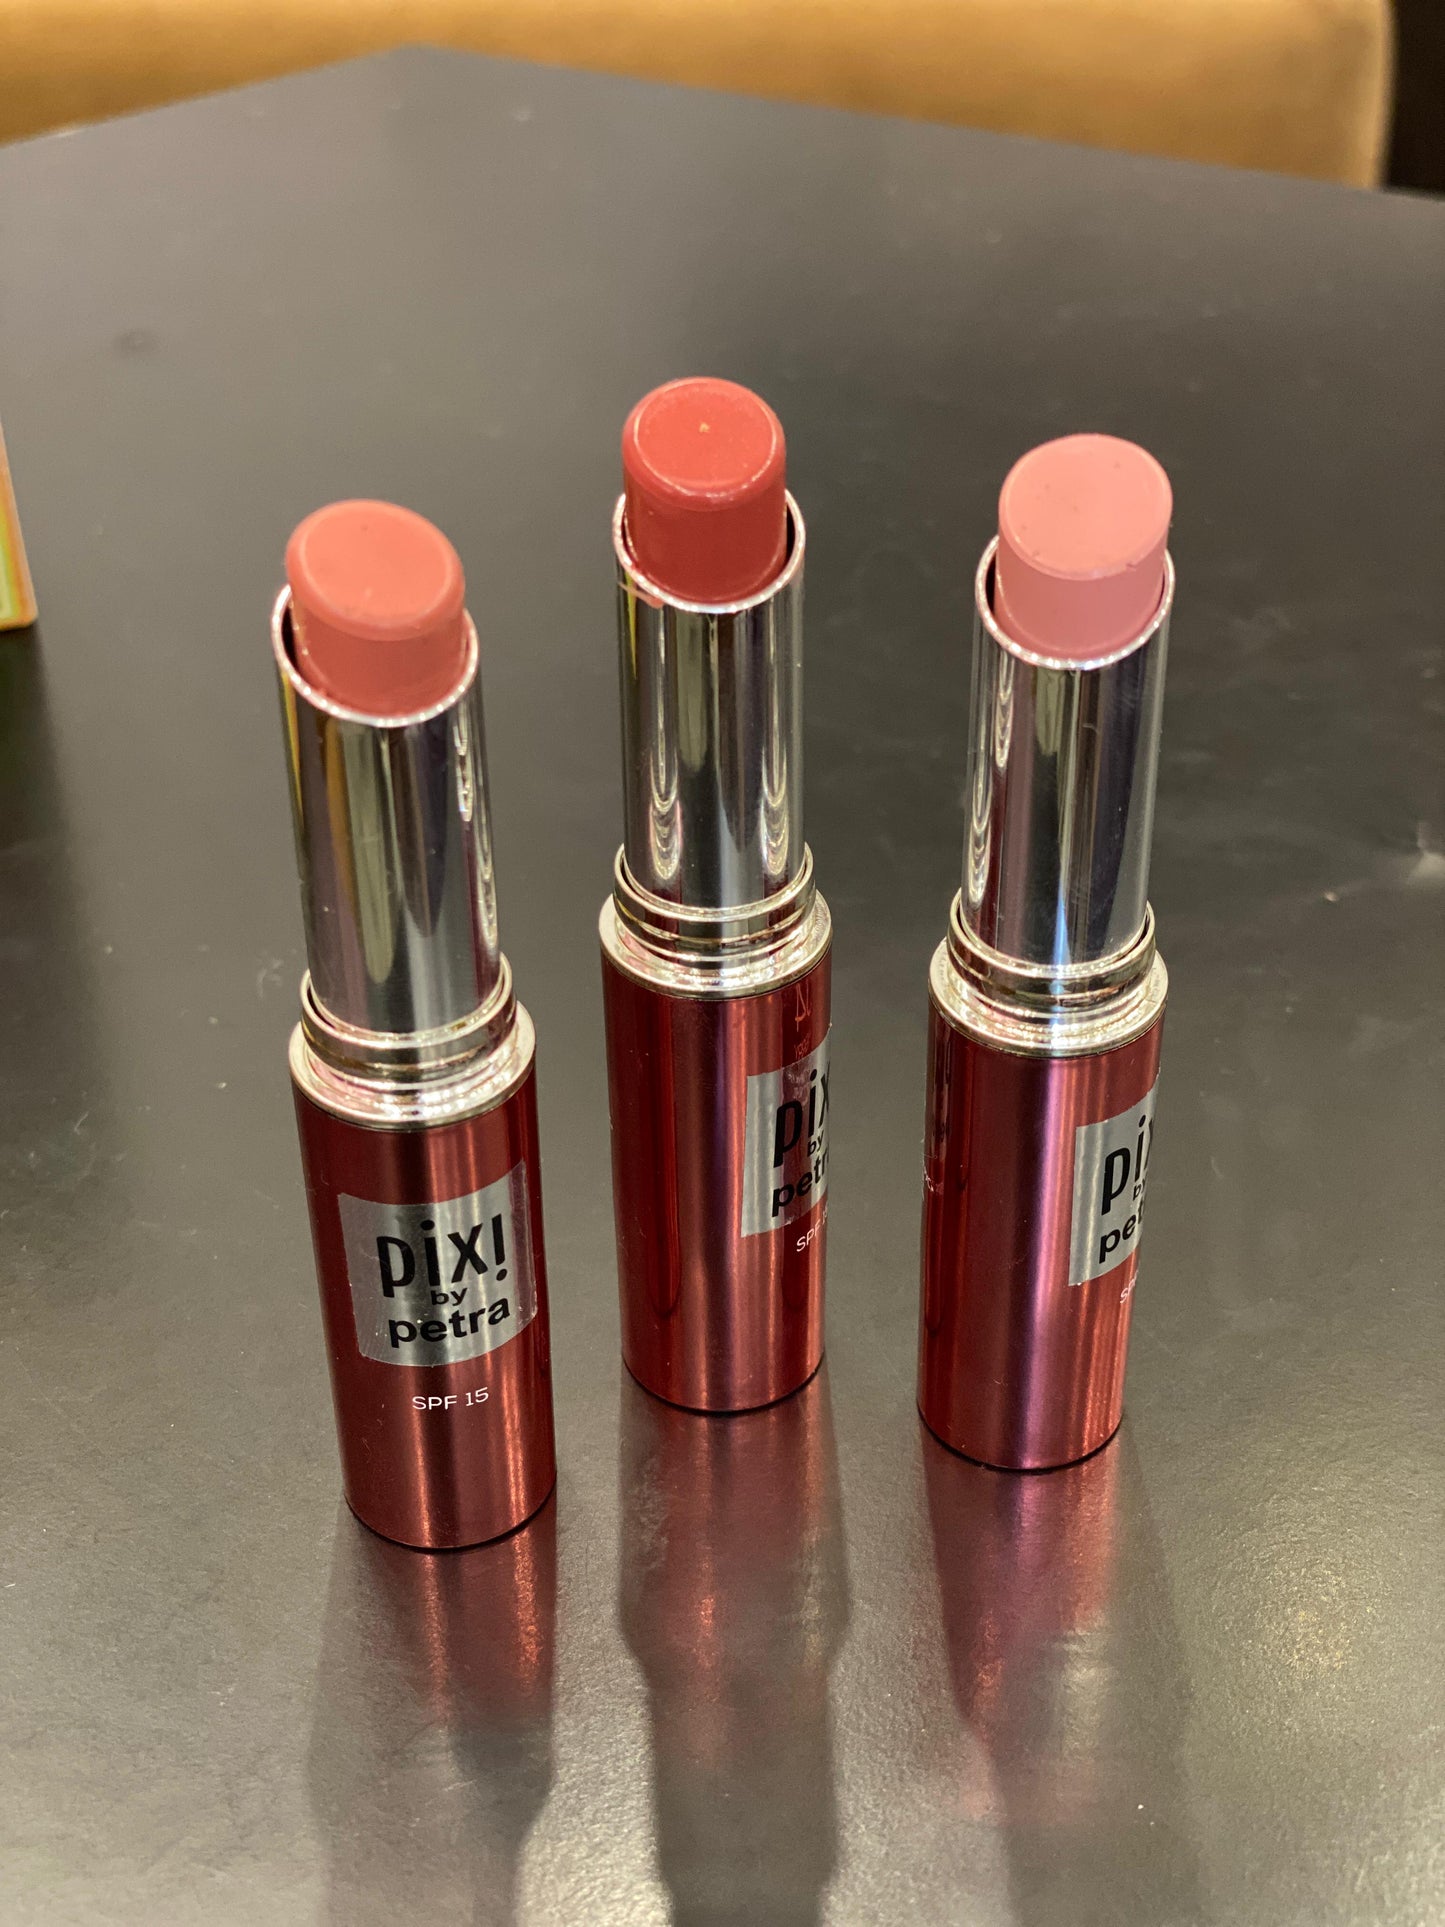 Tinted Matte Lipstick from Pix! by petra With SPF 15 (Pack Of 3)